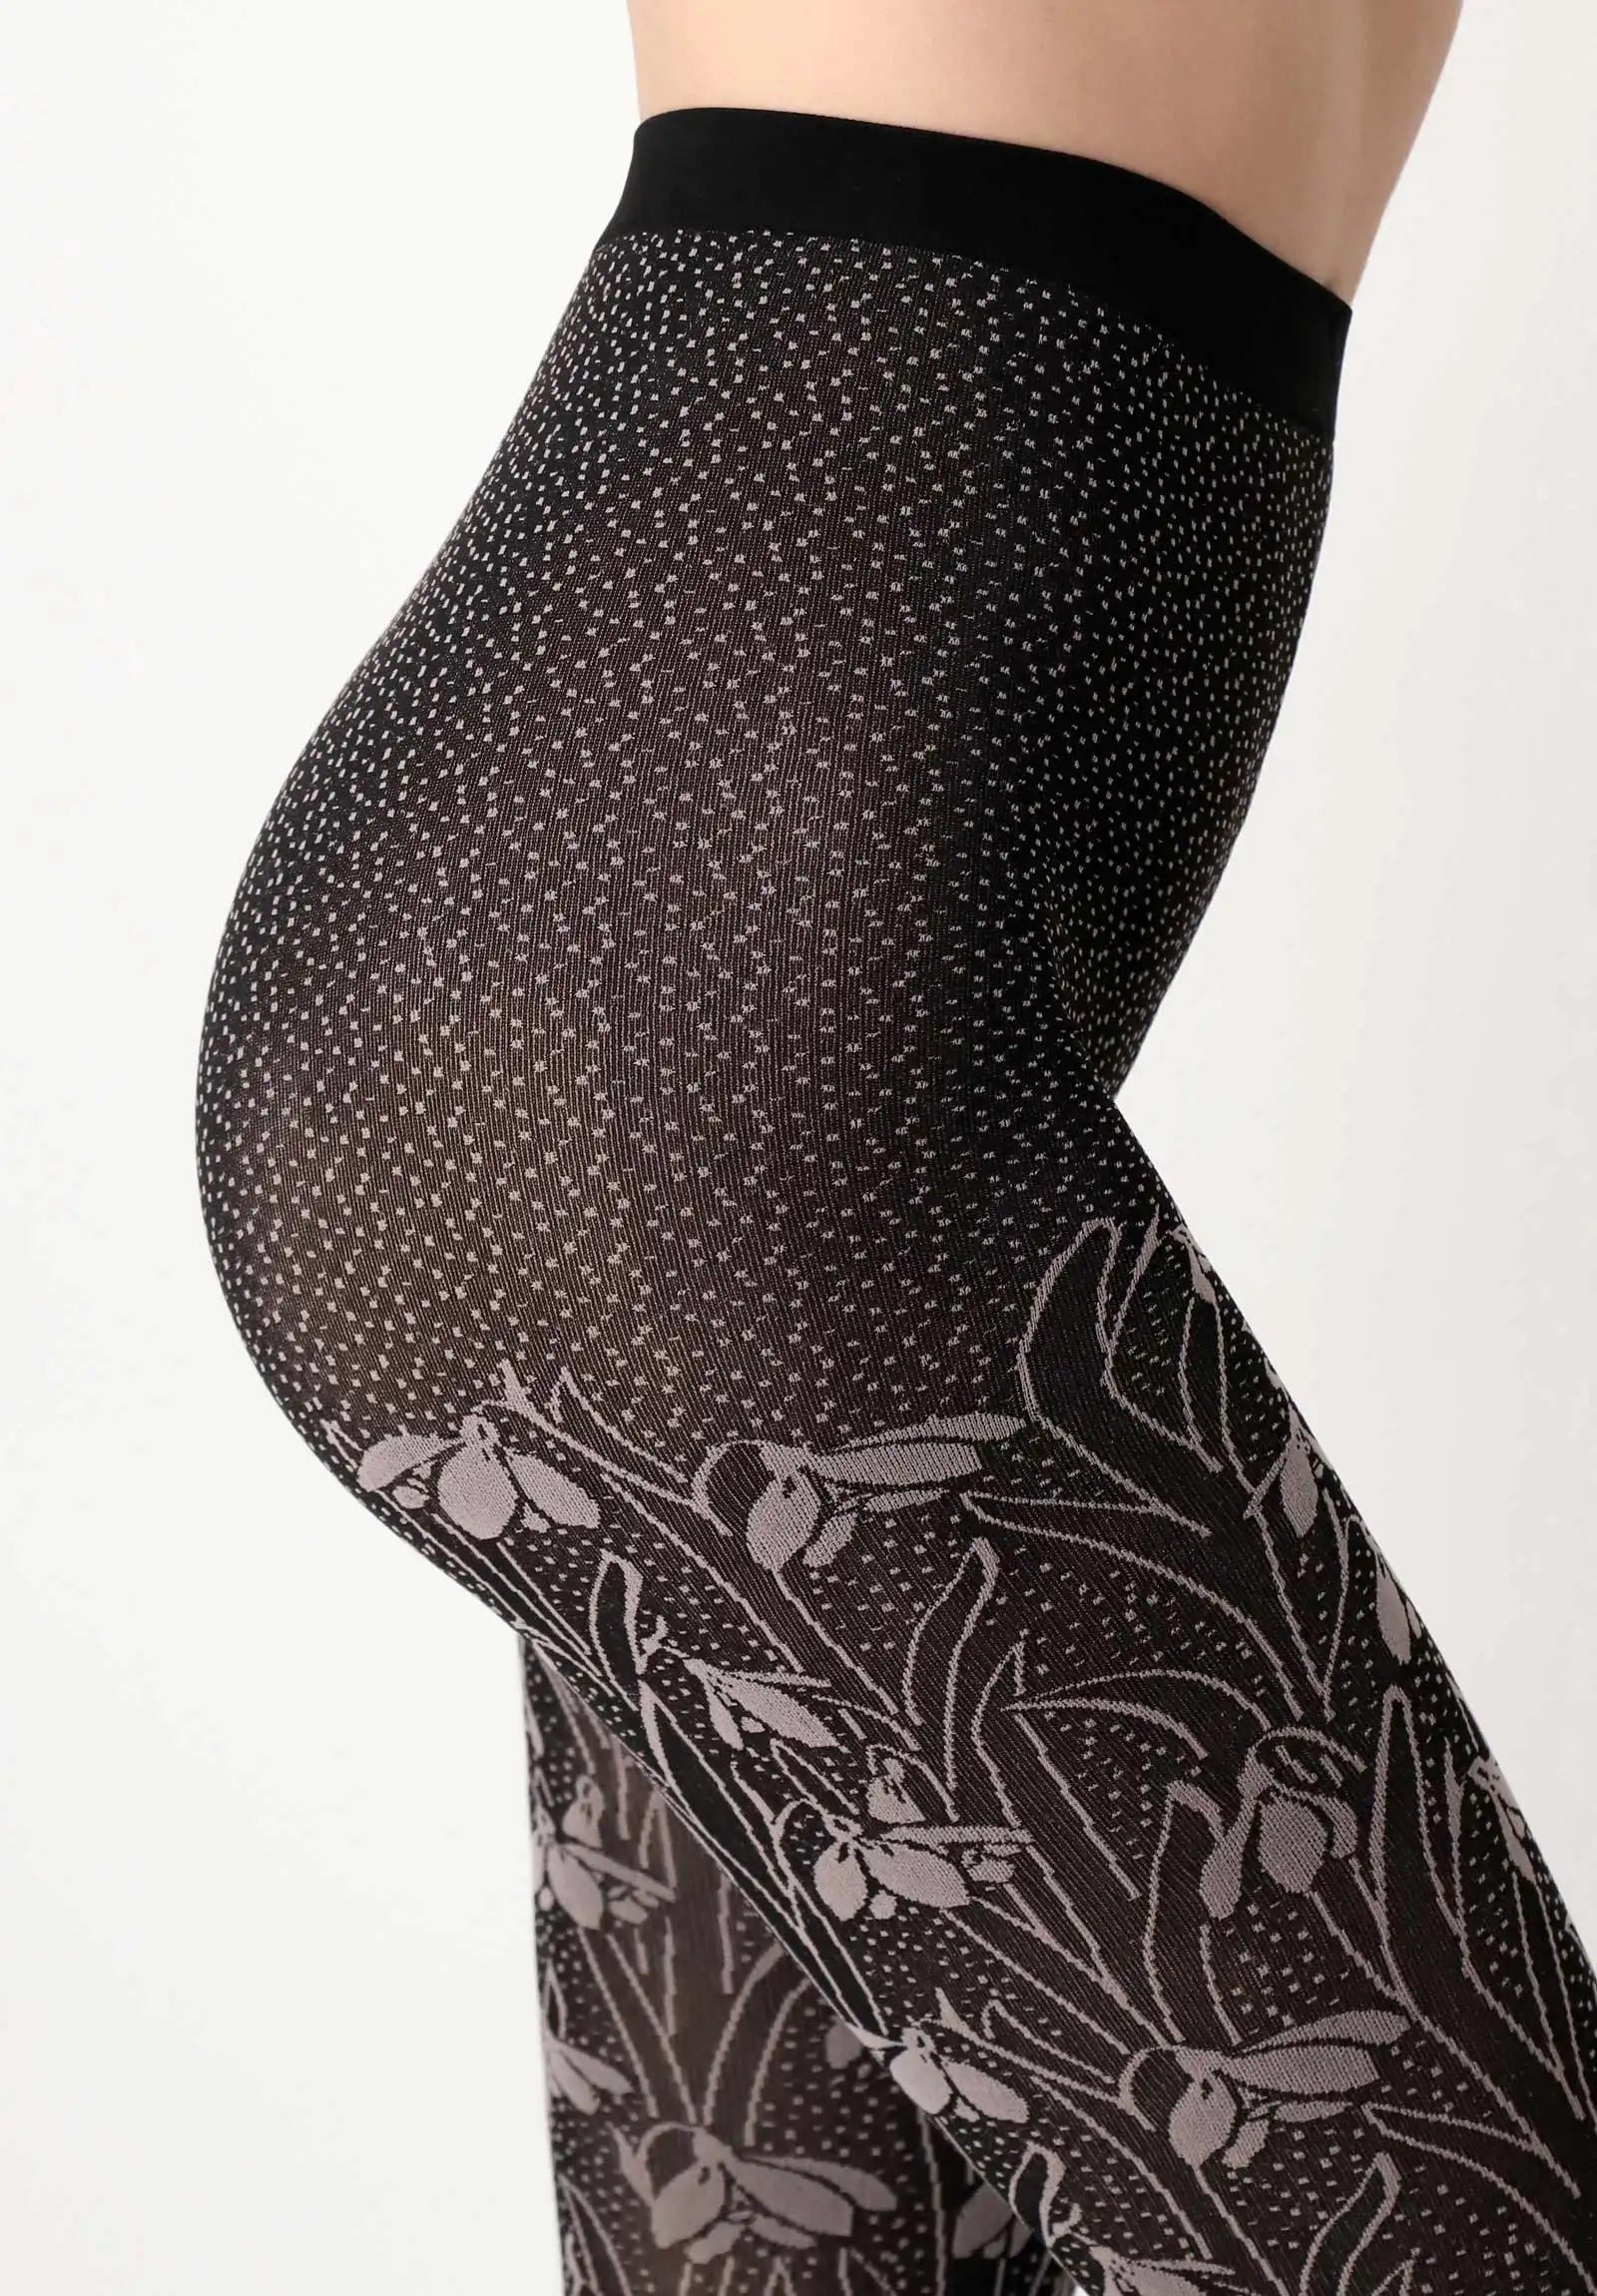 Oroblù I Love First Class Flowers Tights - Black opaque fashion tights with an all over snowdrops floral pattern in beige with a speckled background all the way to the wasit.